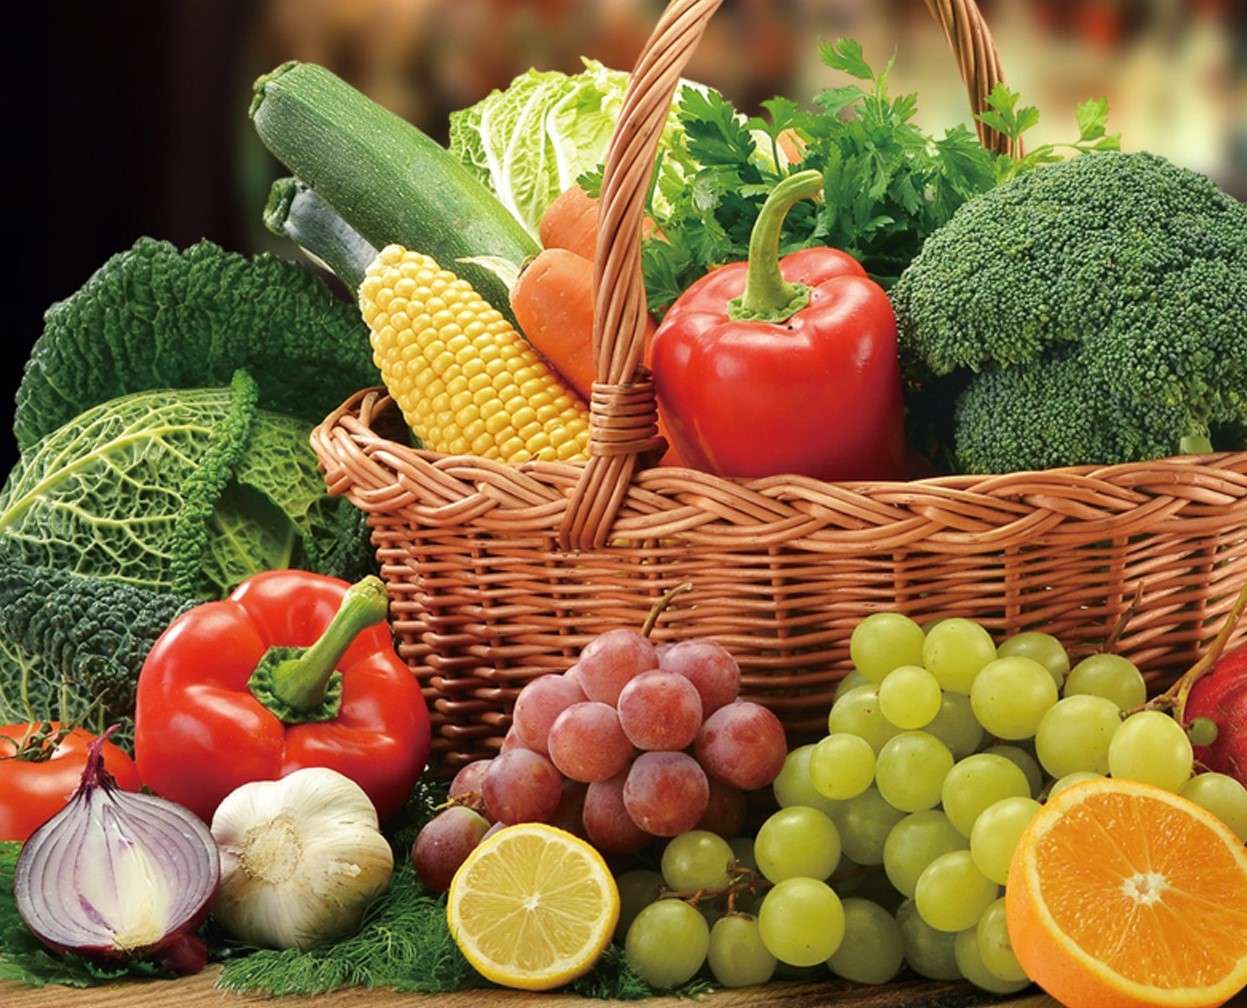 Vegetables and fruits jigsaw puzzle online